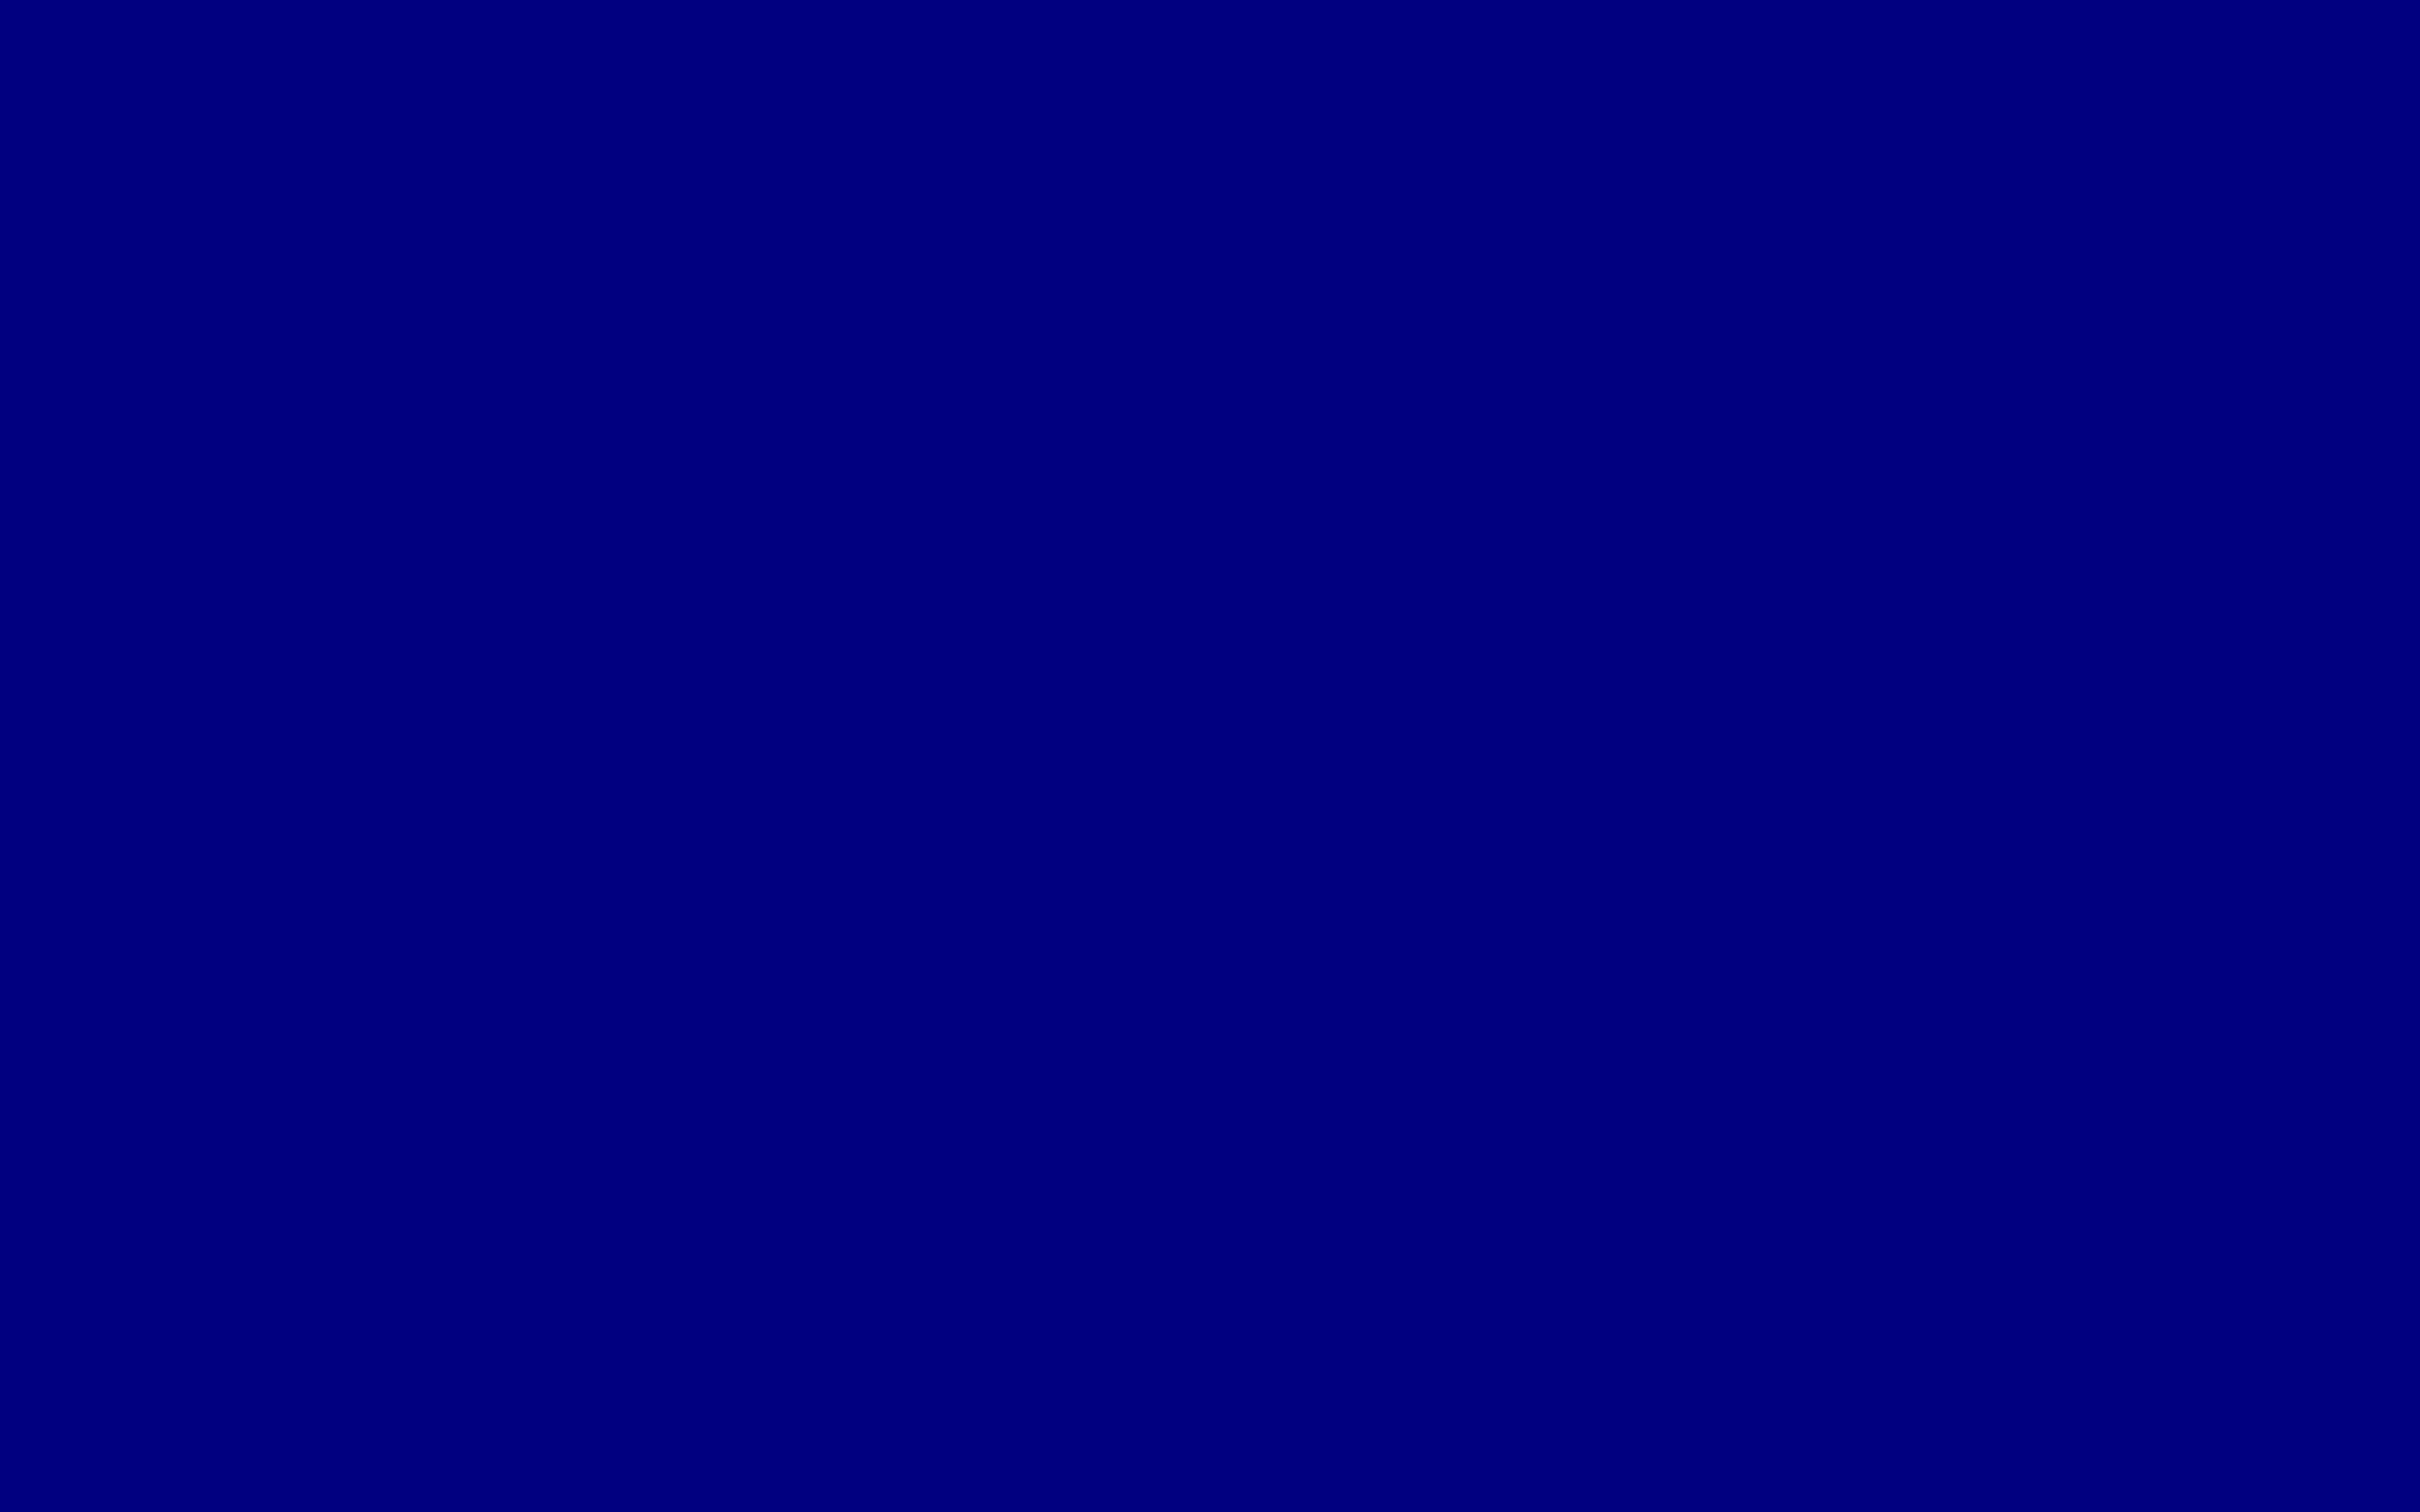 Royal Blue Wallpaper Hd : Navy Blue Wallpapers (60+ images) - See more ...